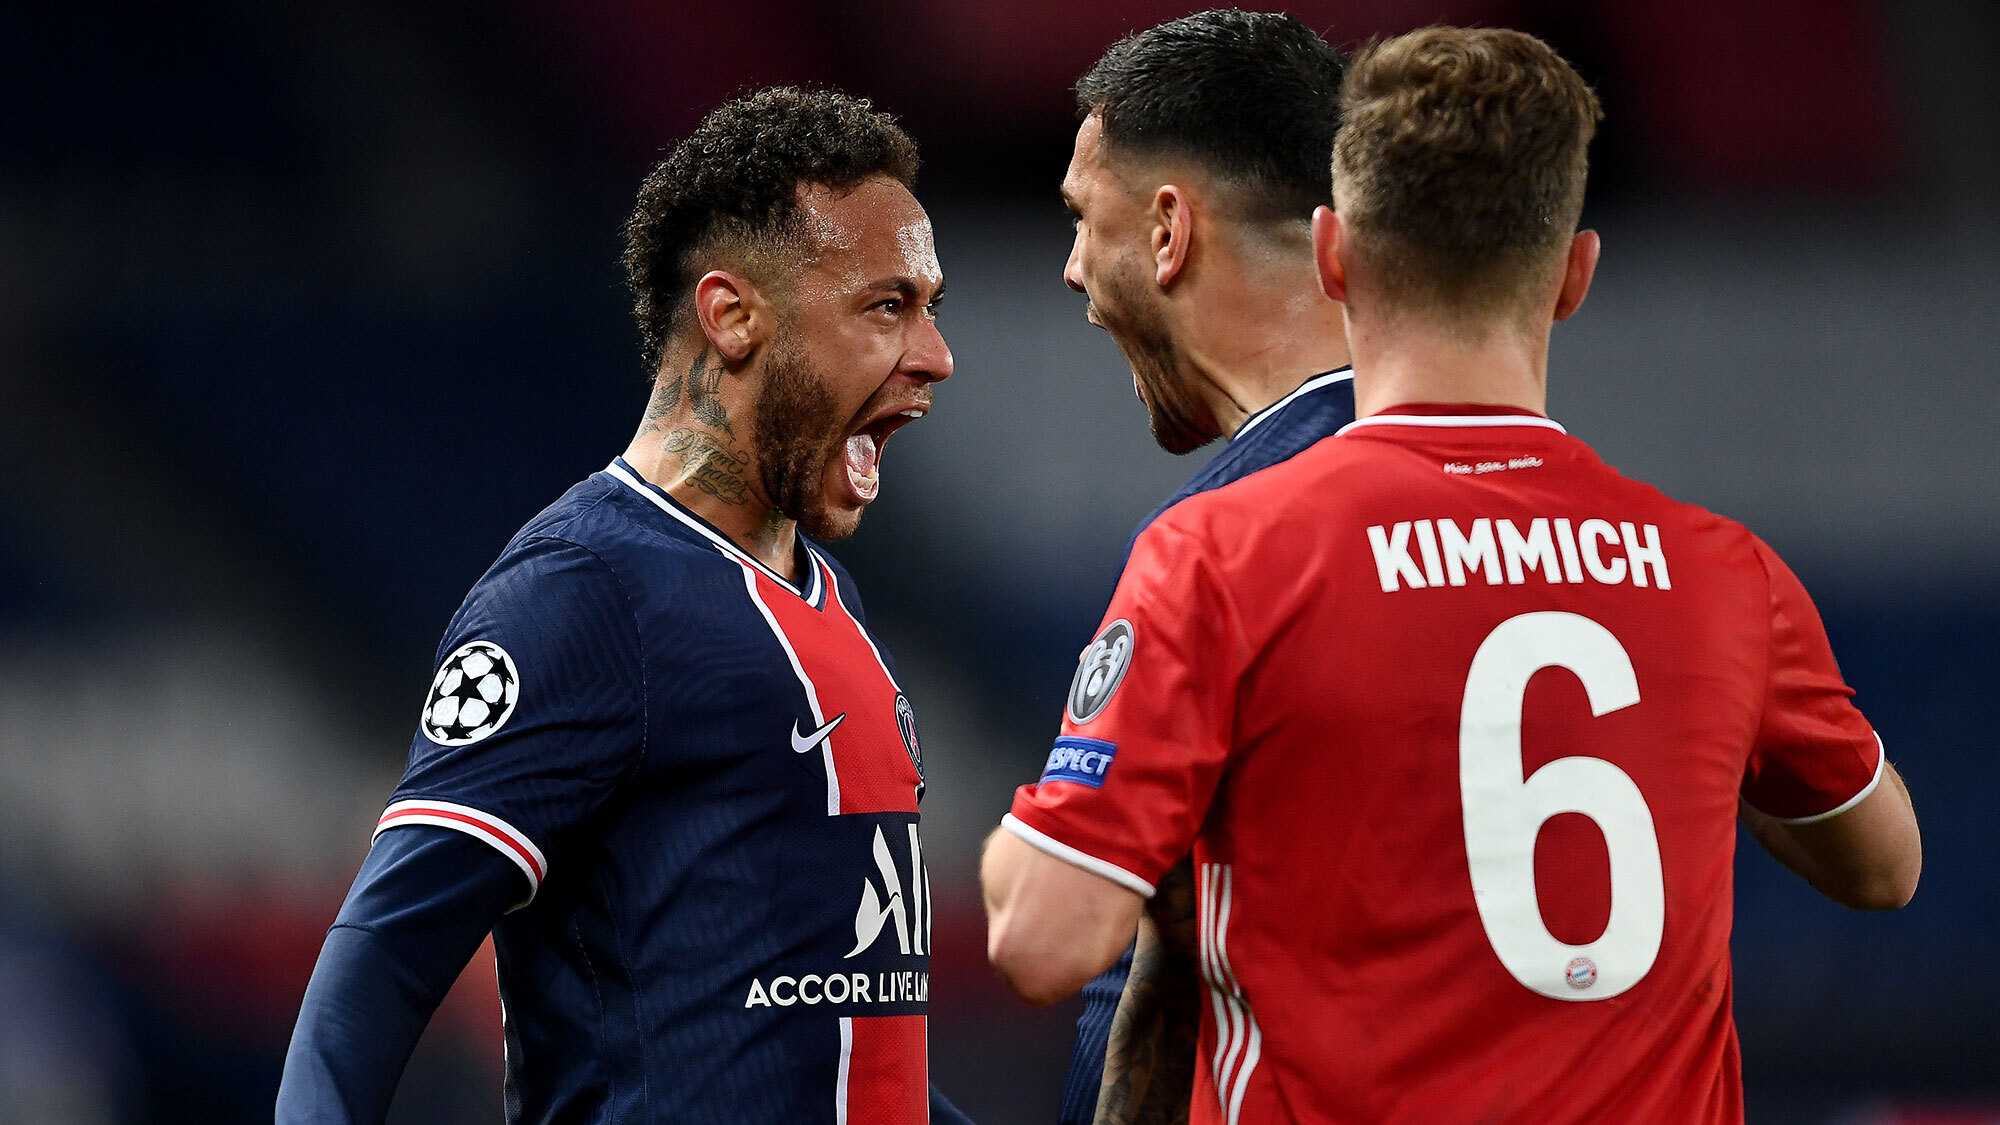 PSG chase Bayern away from Champions League despite 1-0 loss (VIDEO)